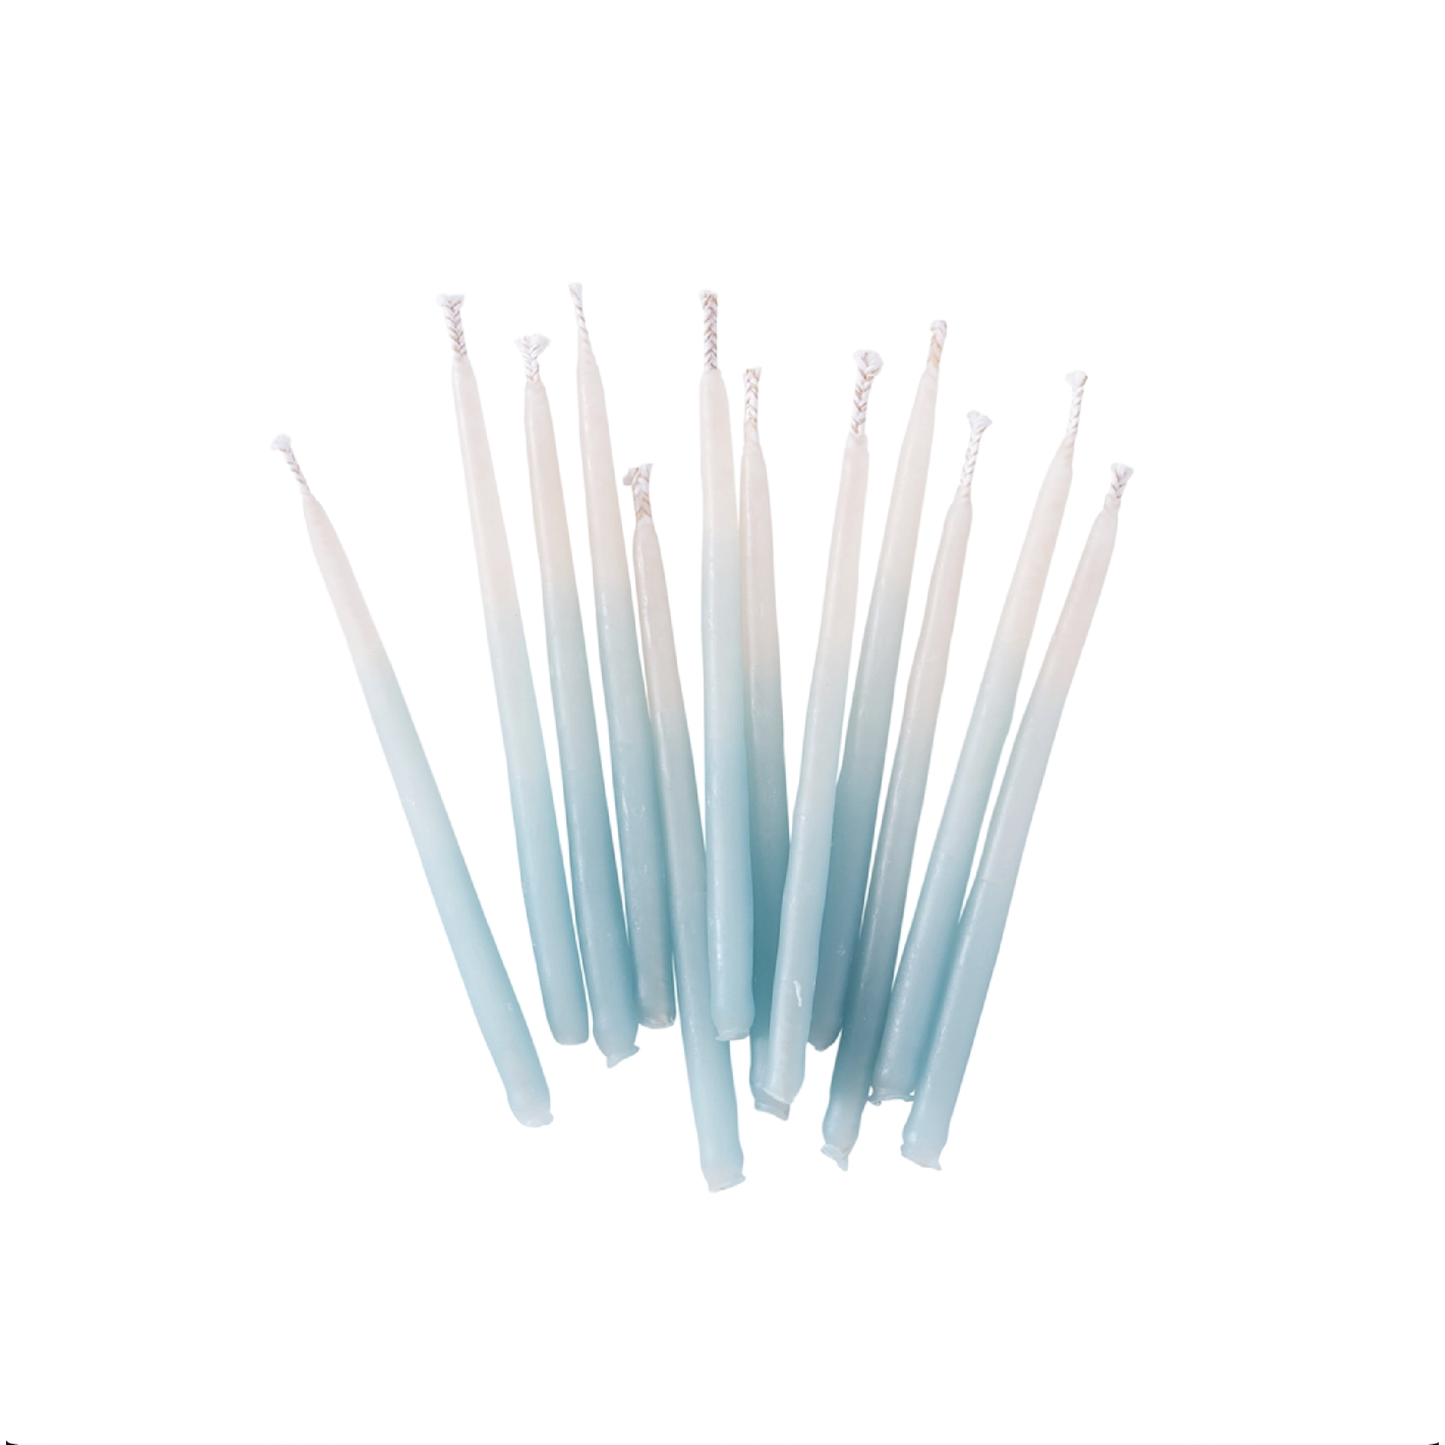 SALE - Aqua Ombre Beeswax Birthday Candles